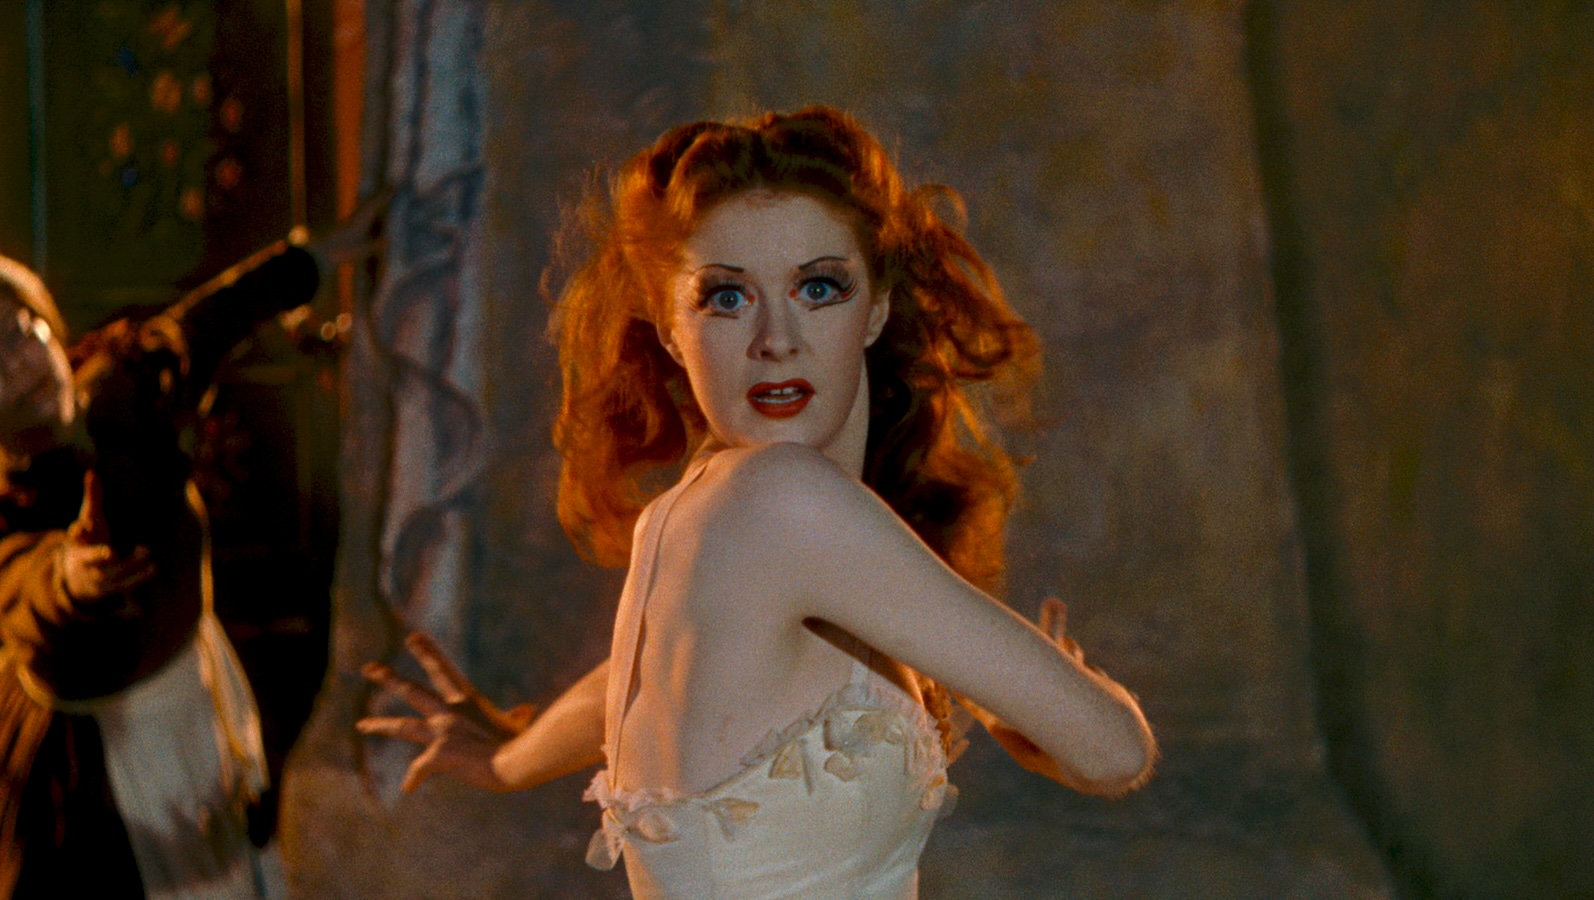 A woman with fiery red hair dances, her head turned toward the camera